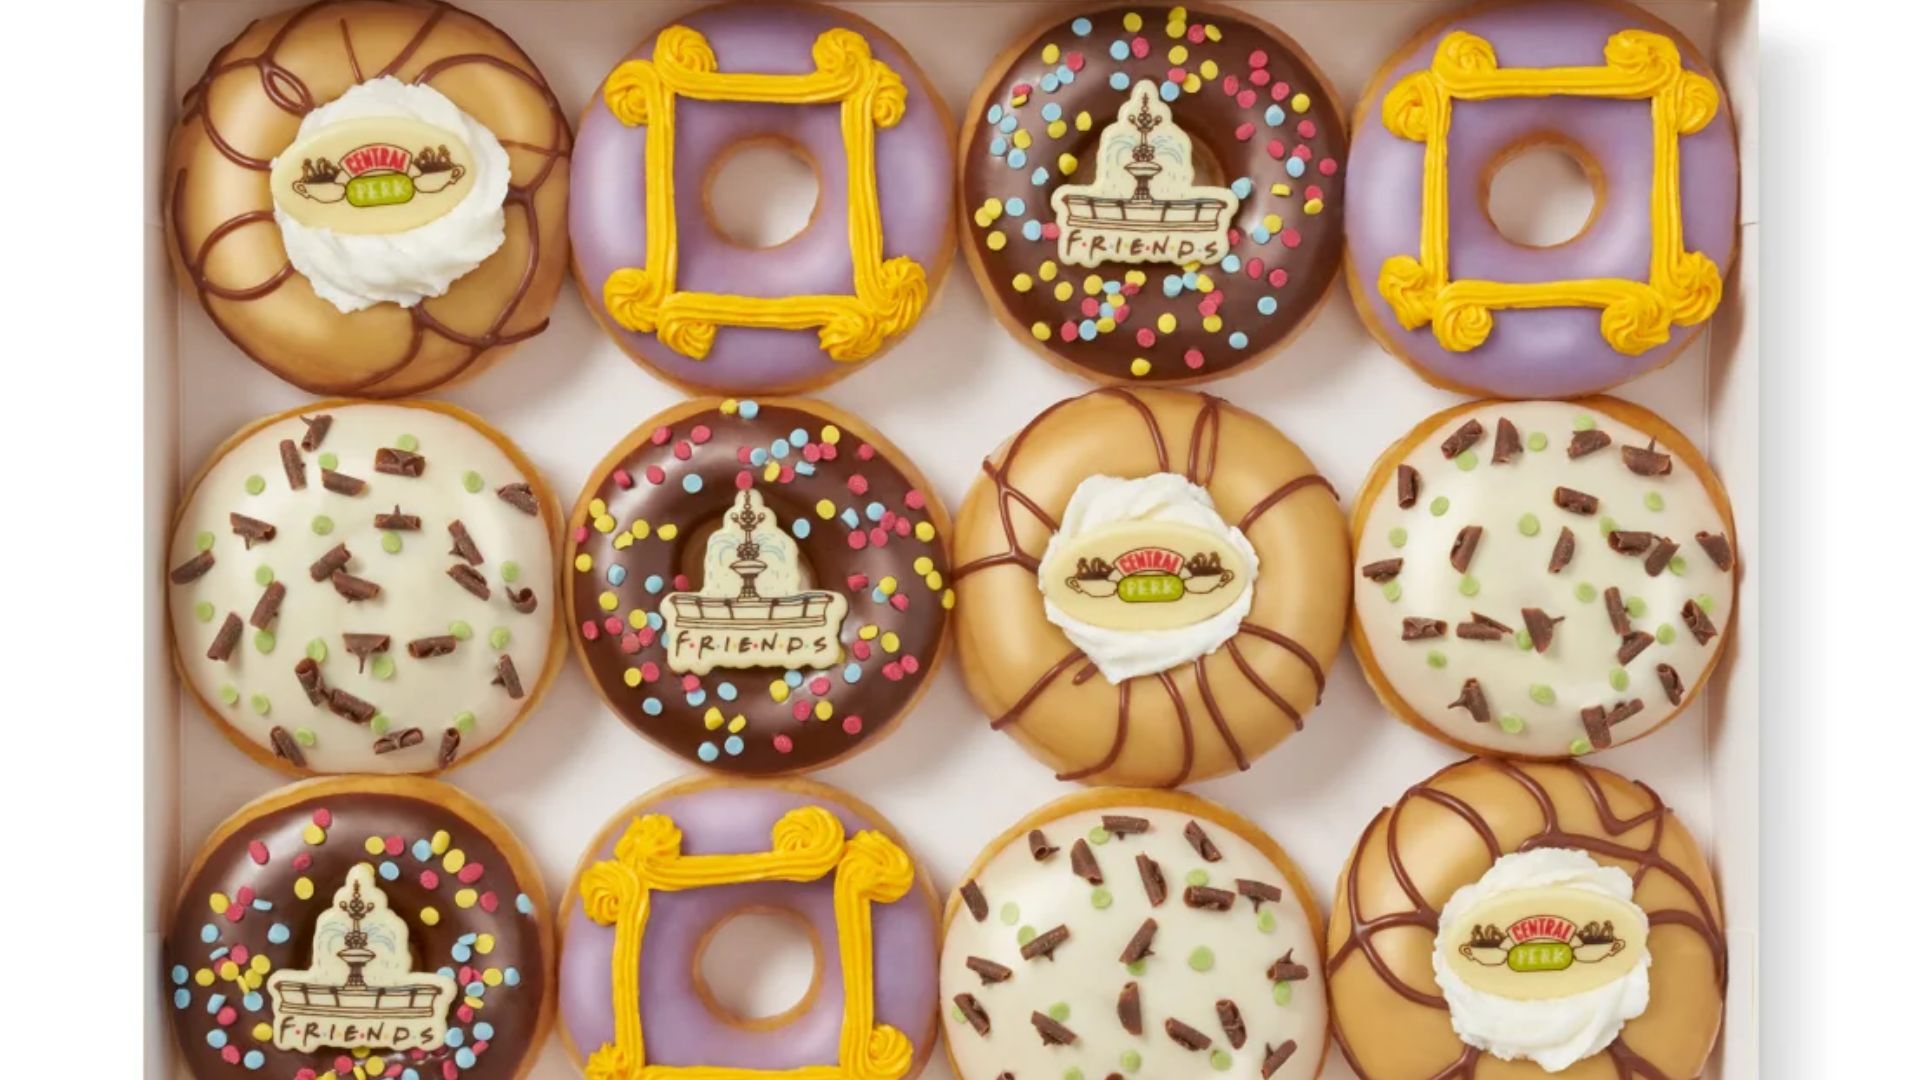 Krispy Kreme is rolling out ‘Friends’-themed doughnuts. But you probably can’t get any